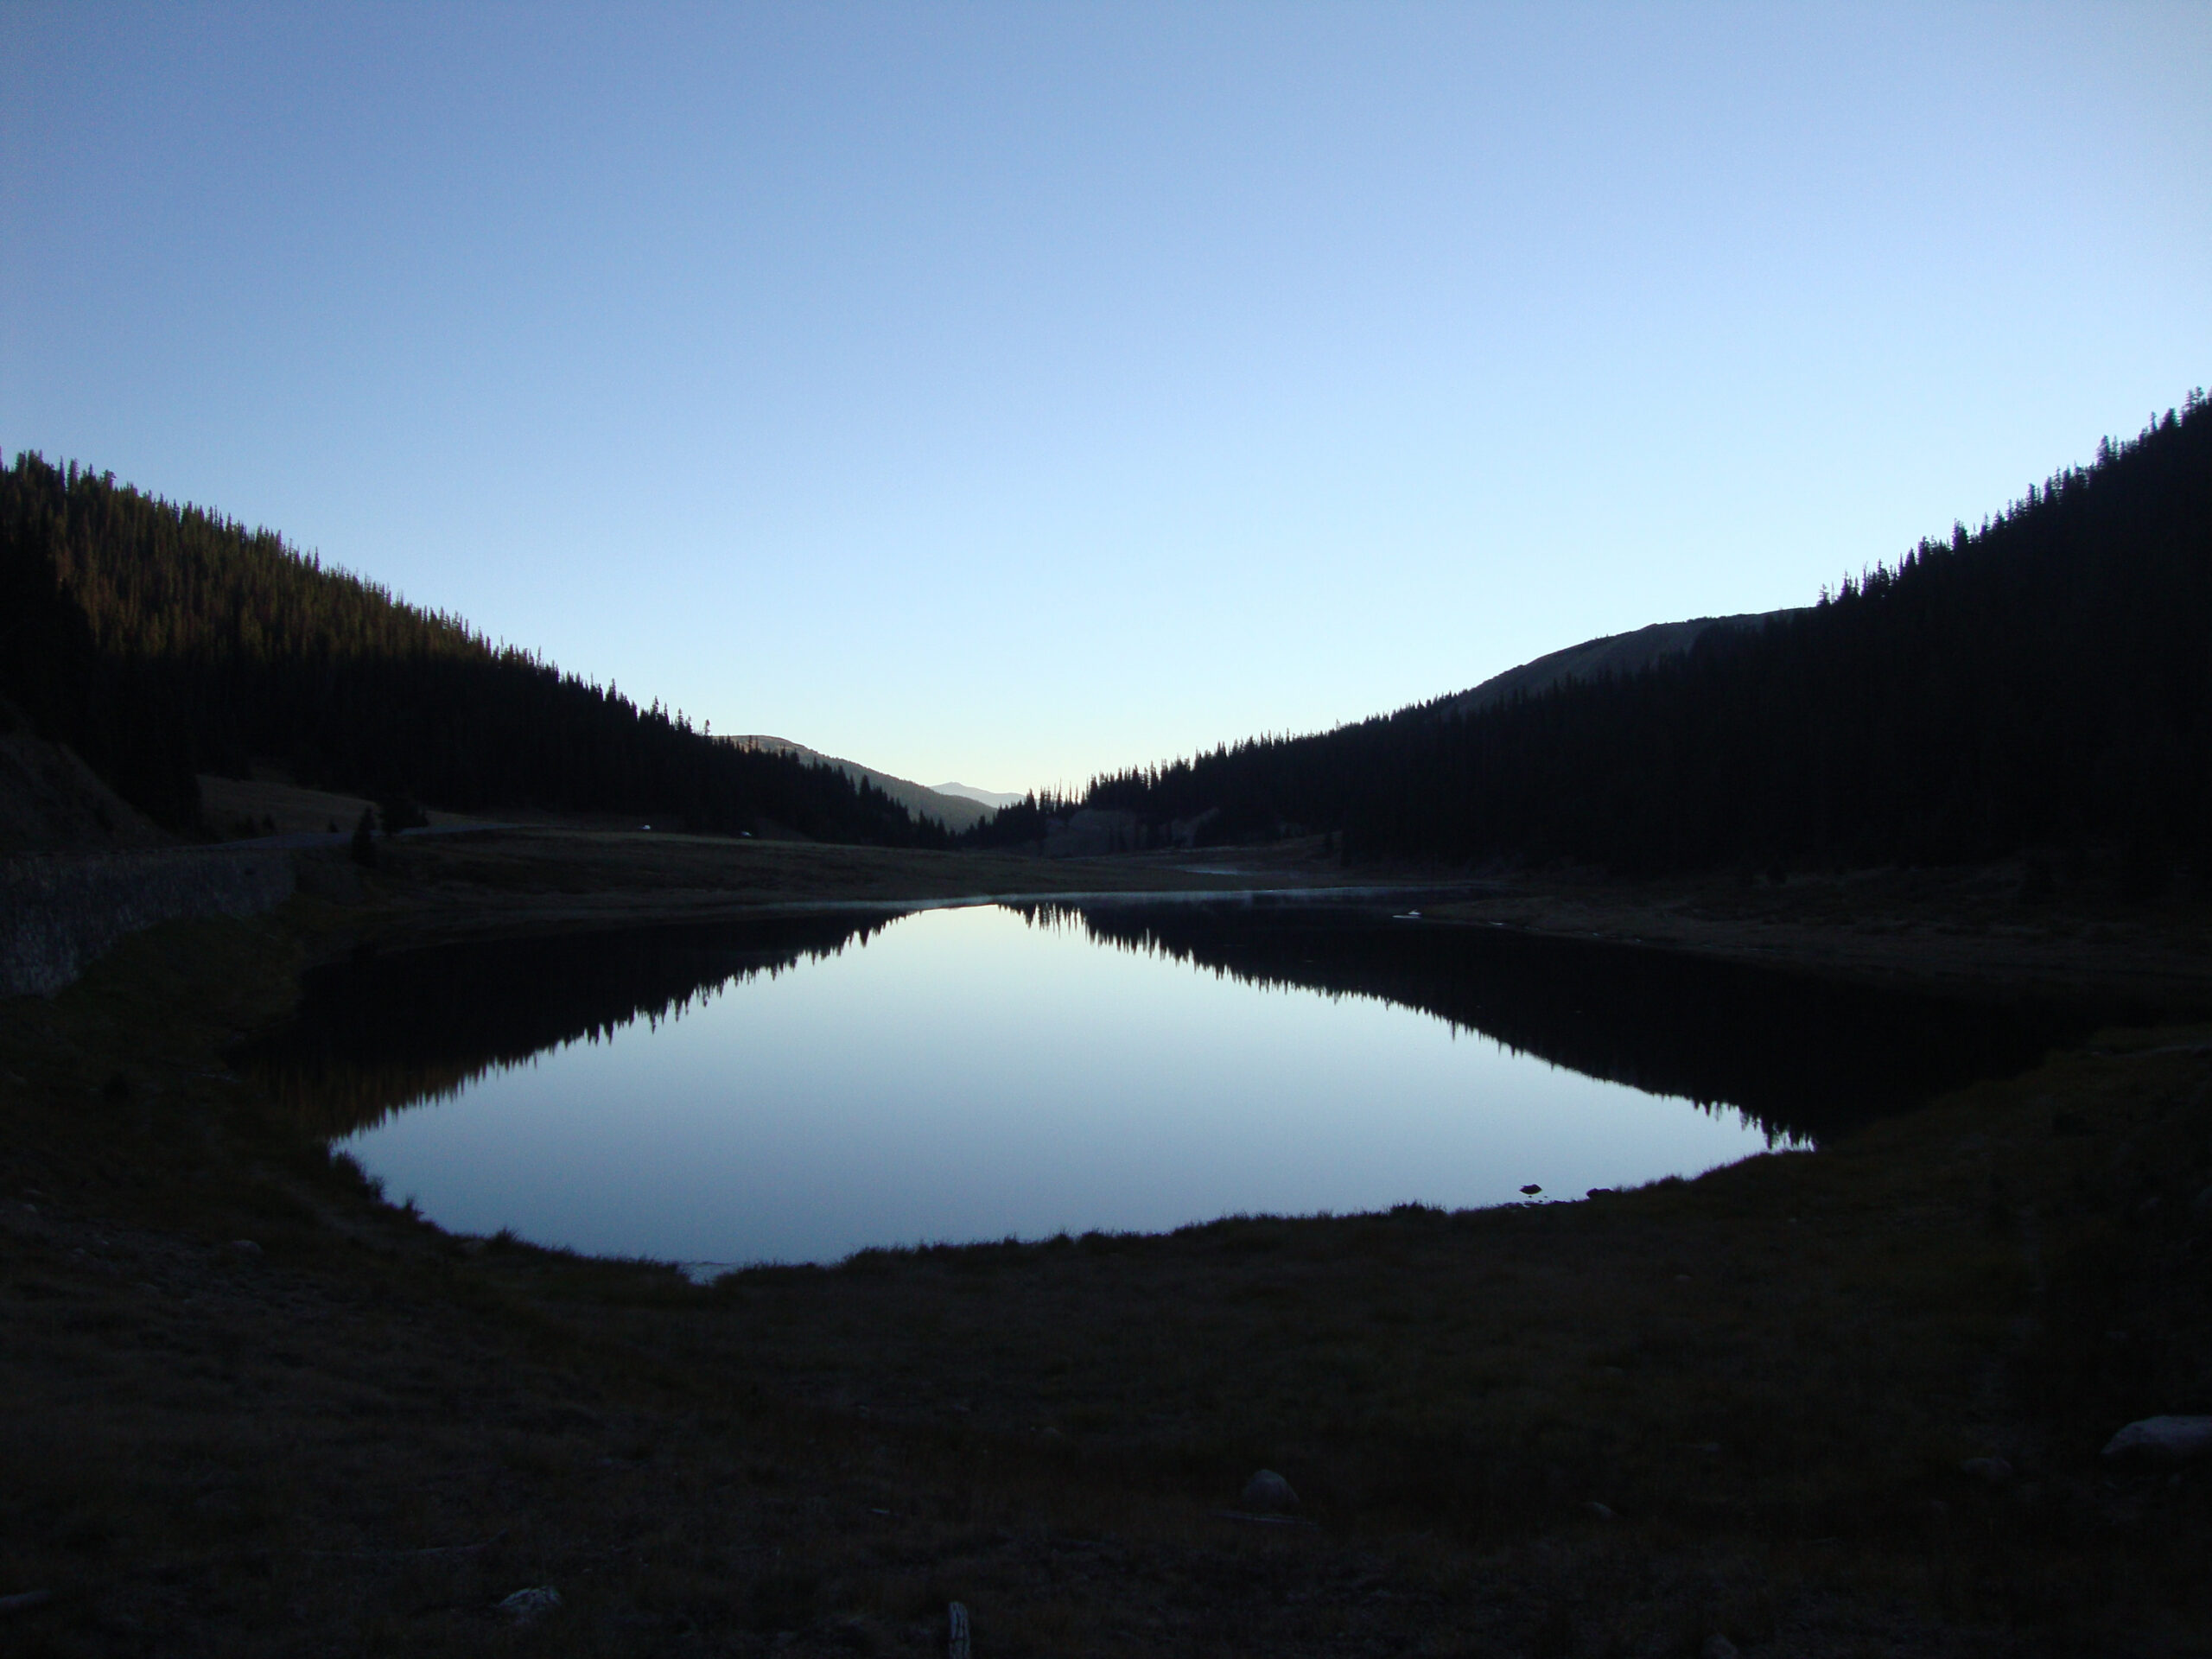 Poudre Lake is the headwaters of the Cache la Poudre River and signify the east side of the Continental Divide